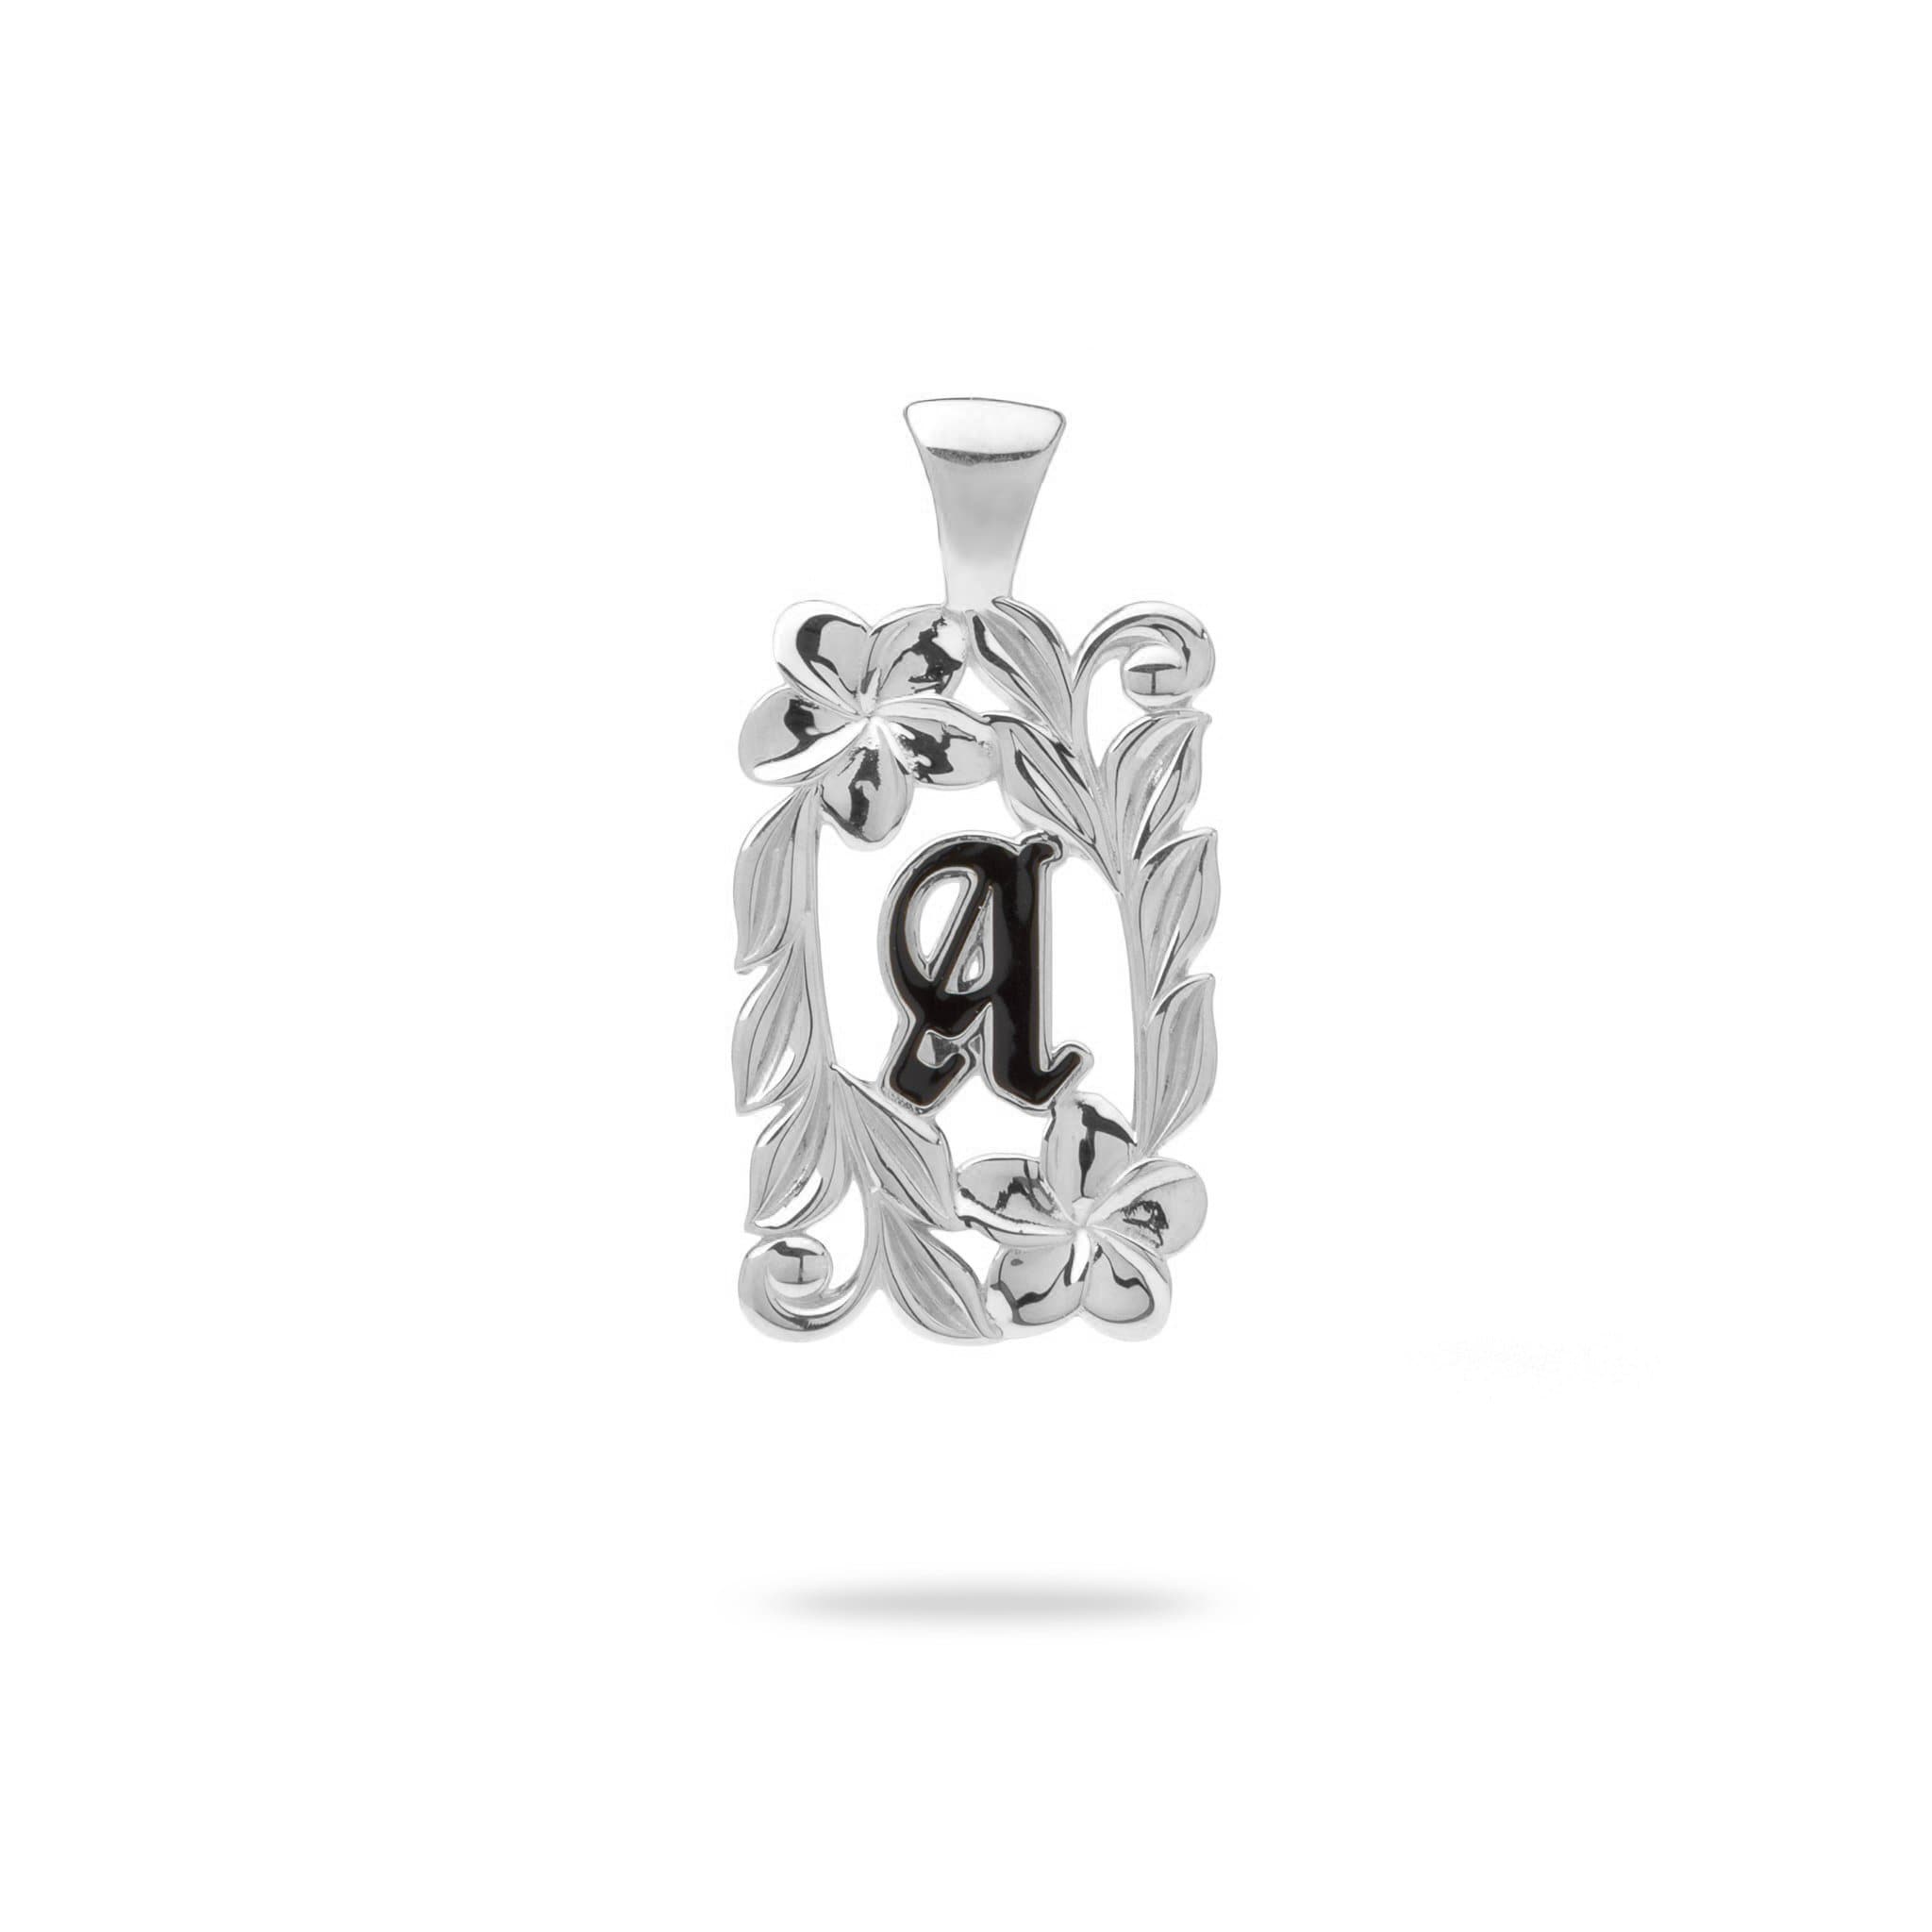 Special Order Hawaiian Heirloom Initial Pendant in White Gold - 014-03615-A-14W